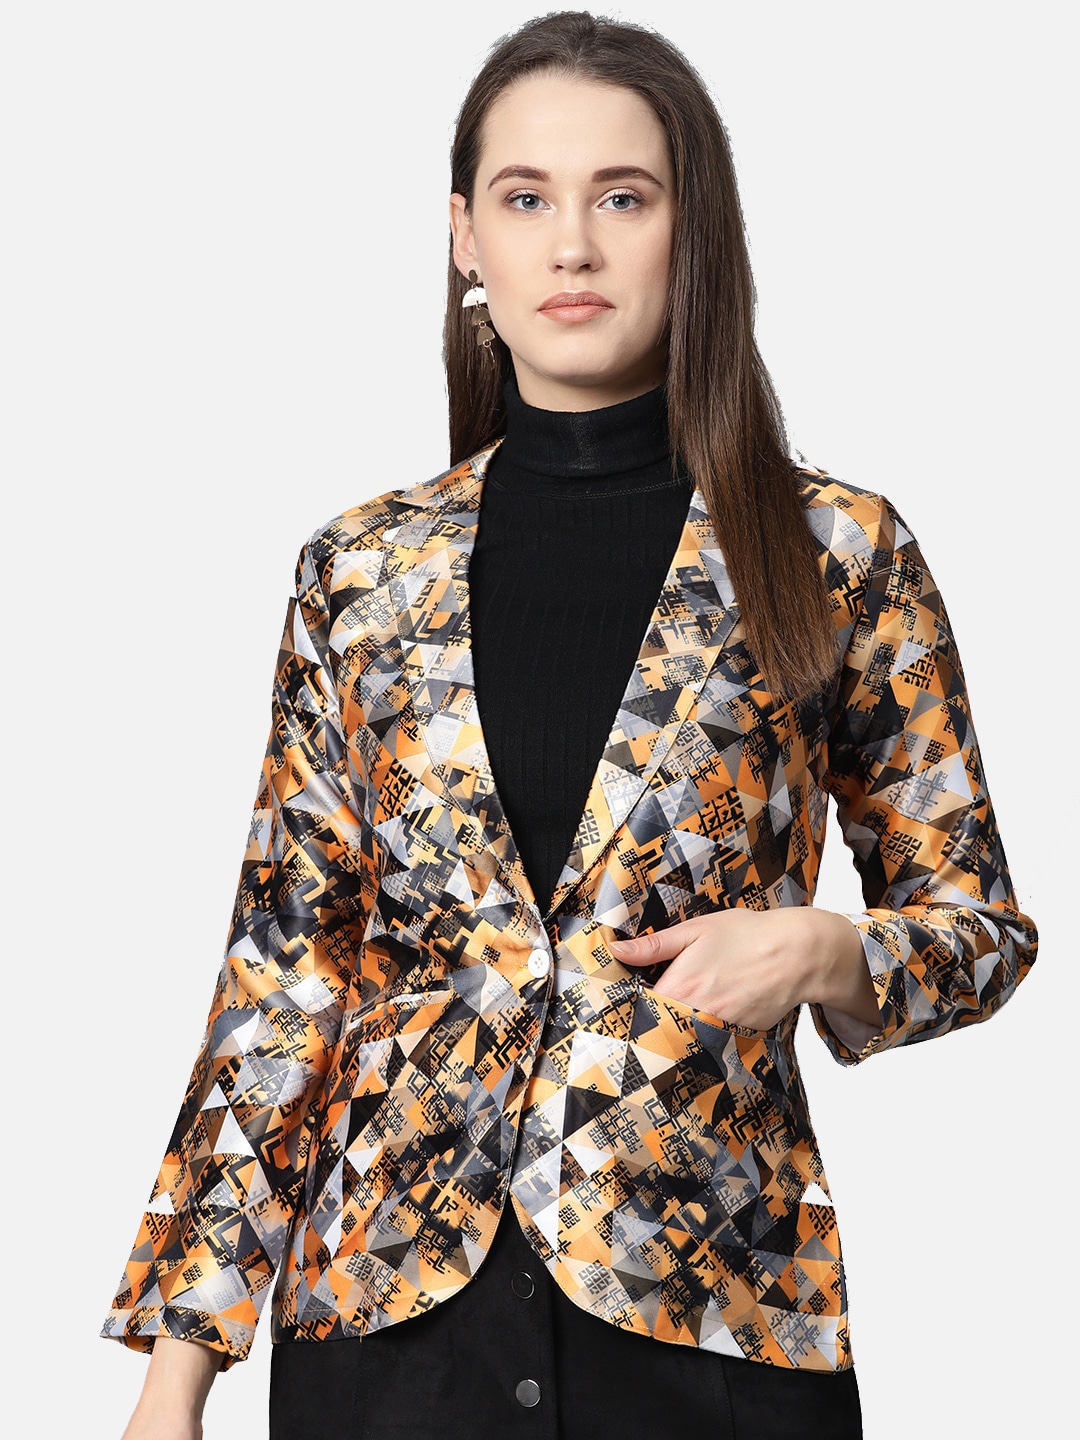 Clothing Blazers | Jompers Women Mustard-Yellow & Black Printed Single-Breasted Casual Blazer - VZ25152